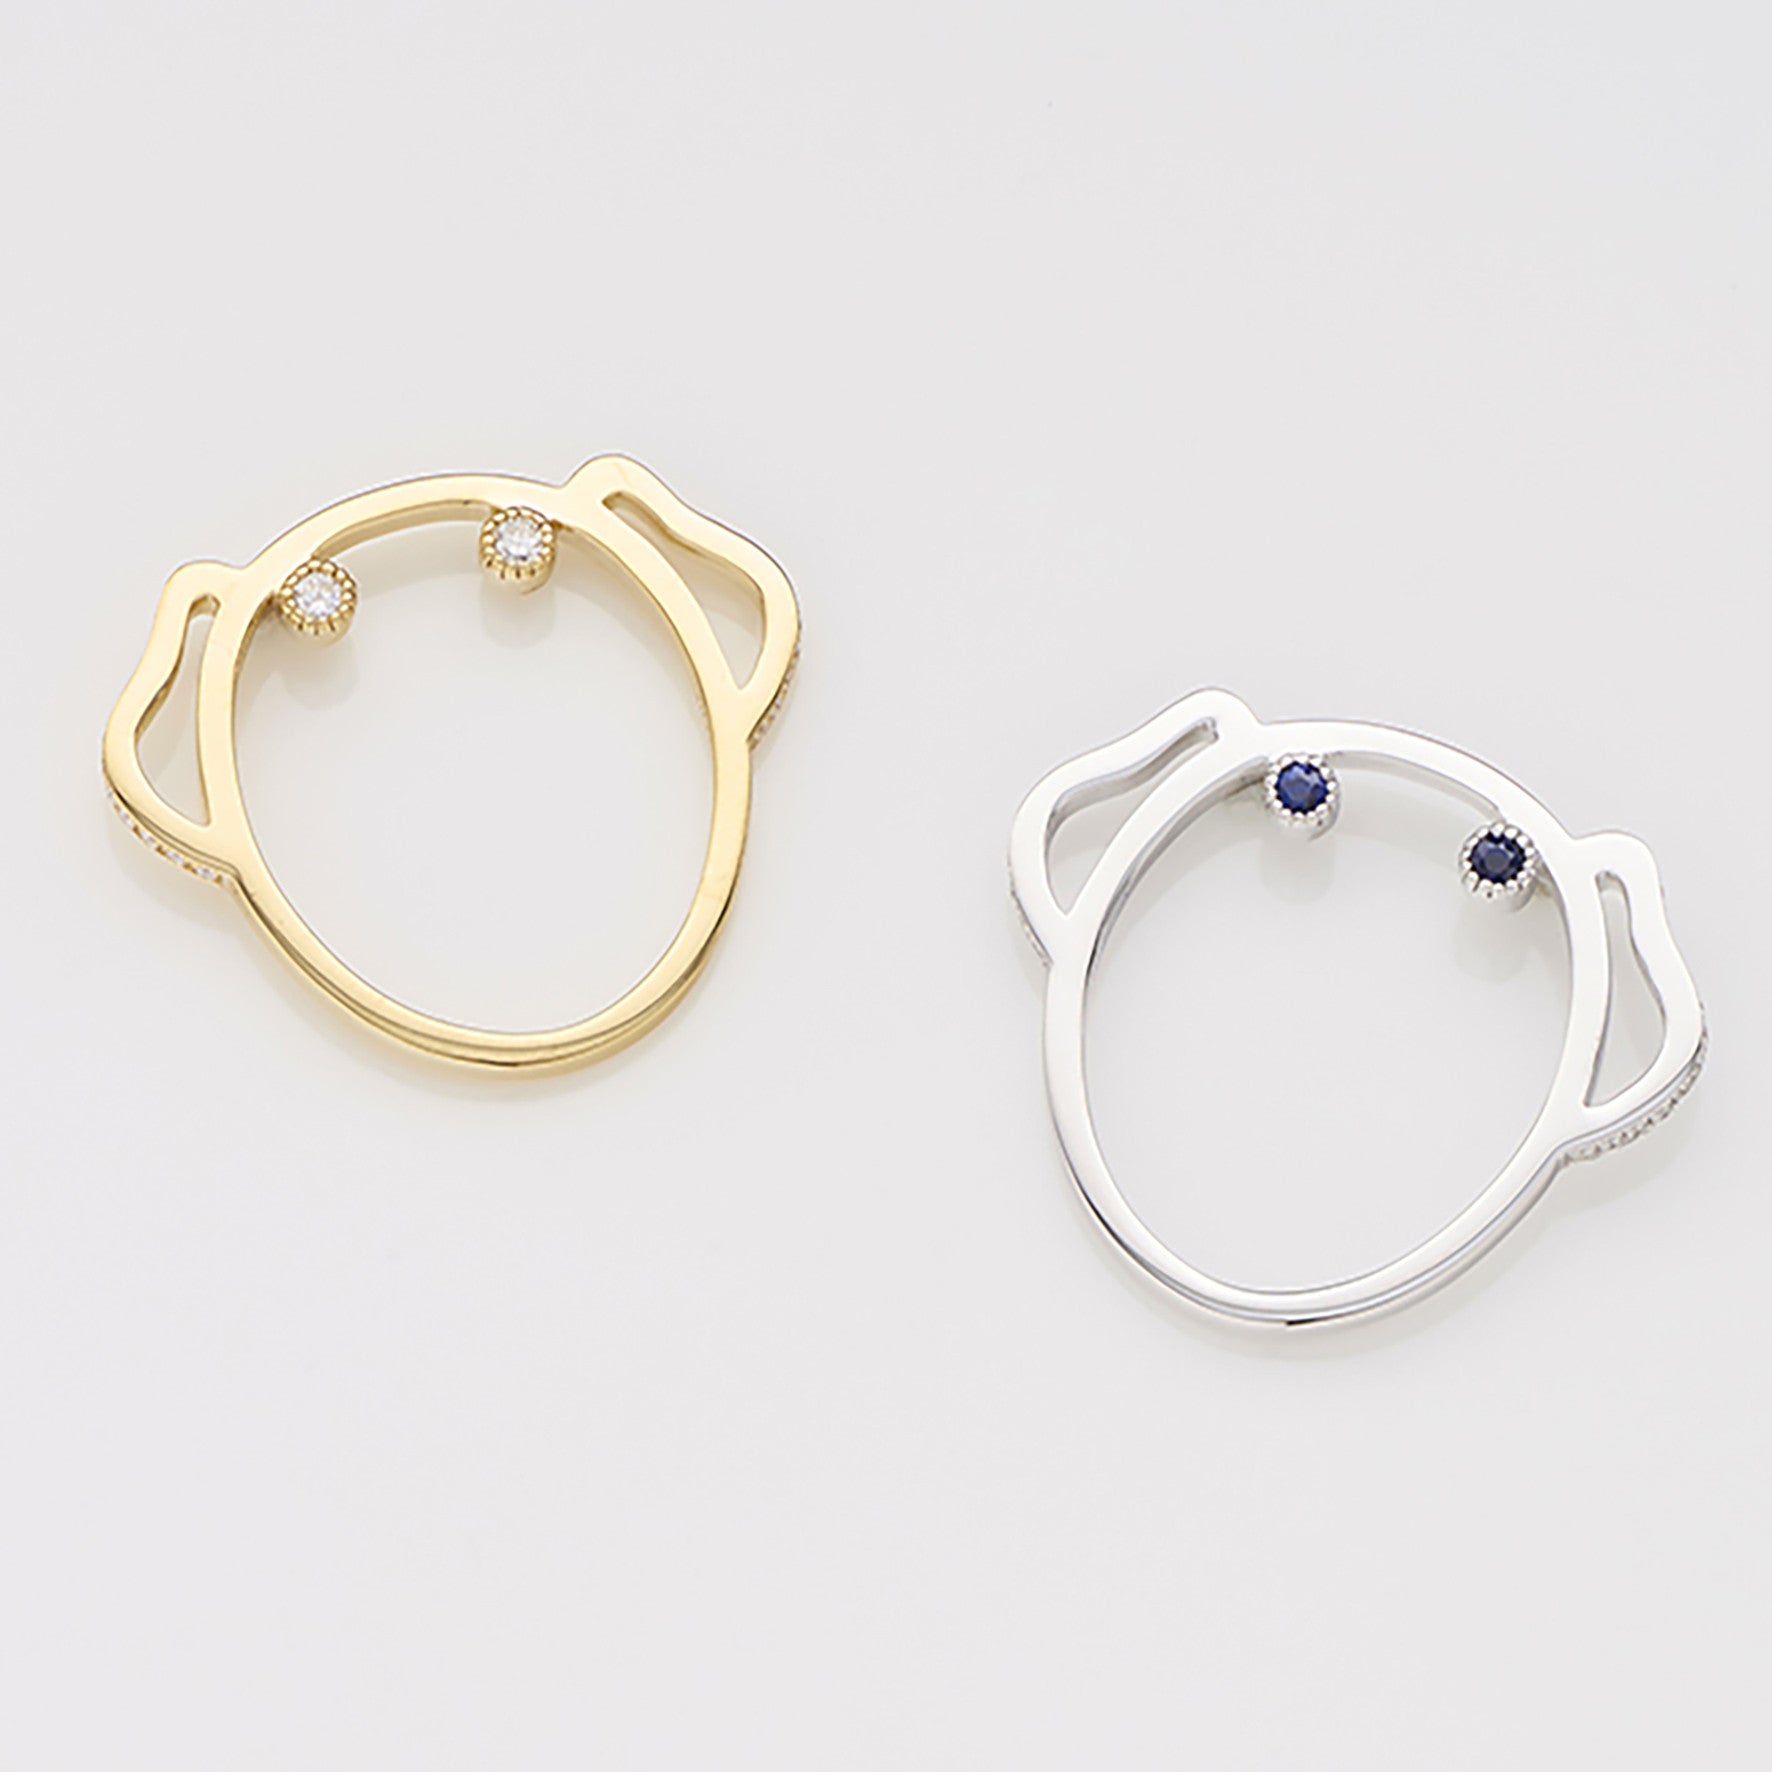 Sapphire Puppy Ring, Ring, Anabela Chan Joaillerie - Fine jewelry with laboratory grown and created gemstones hand-crafted in the United Kingdom. Anabela Chan Joaillerie is the first fine jewellery brand in the world to champion laboratory-grown and created gemstones with high jewellery design, artisanal craftsmanship and a focus on ethical and sustainable innovations.